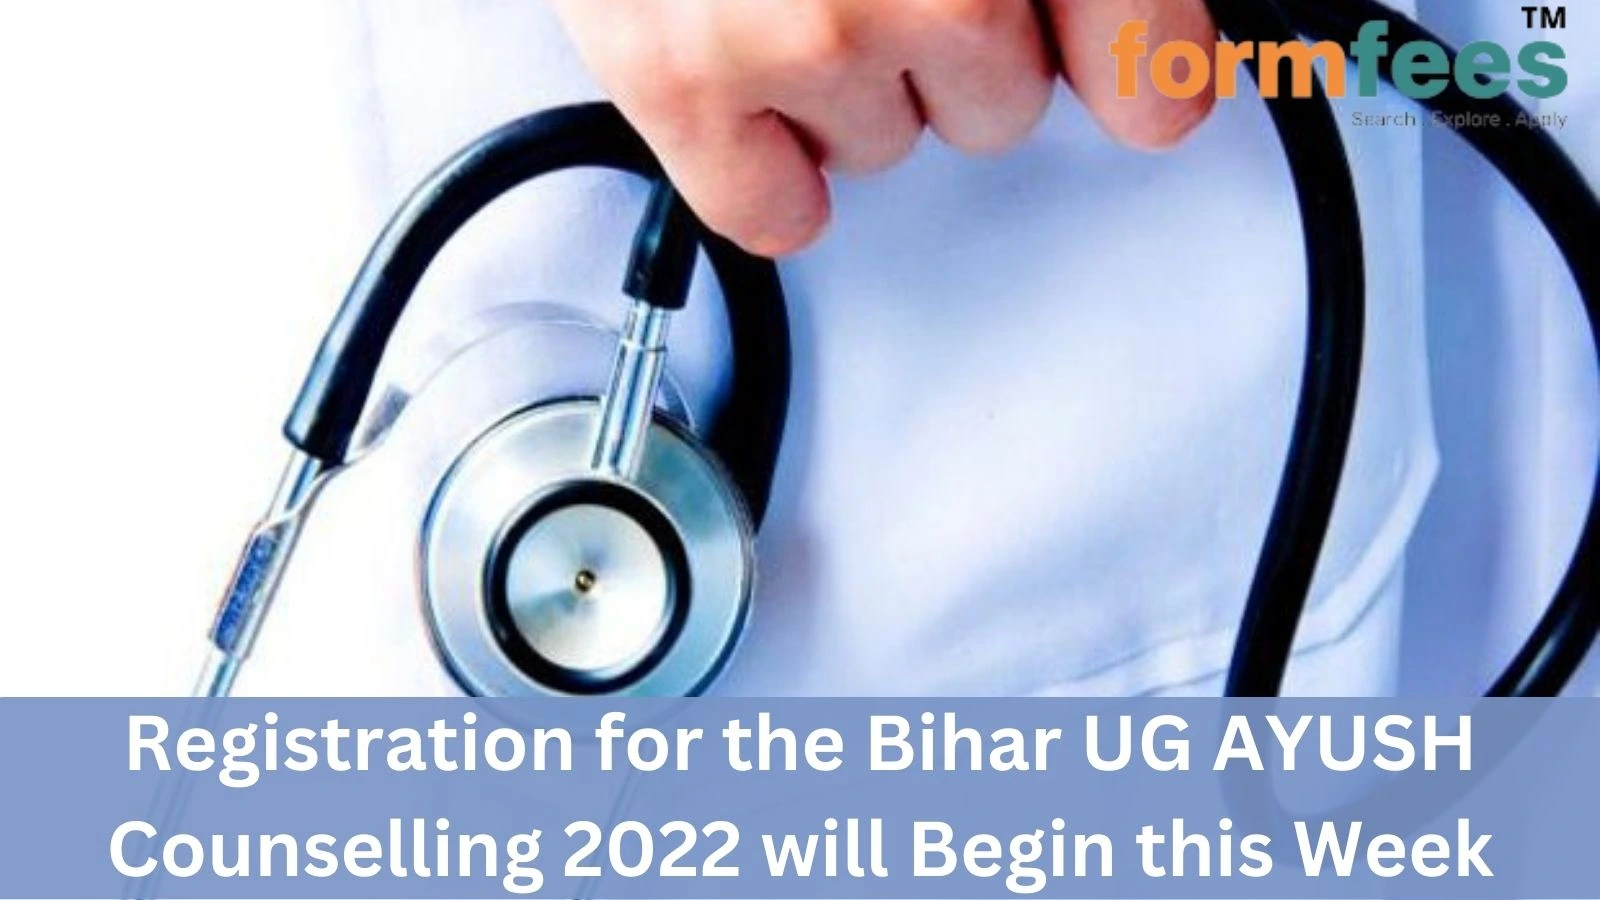 Registration for the Bihar UG AYUSH Counselling 2022 will Begin this Week